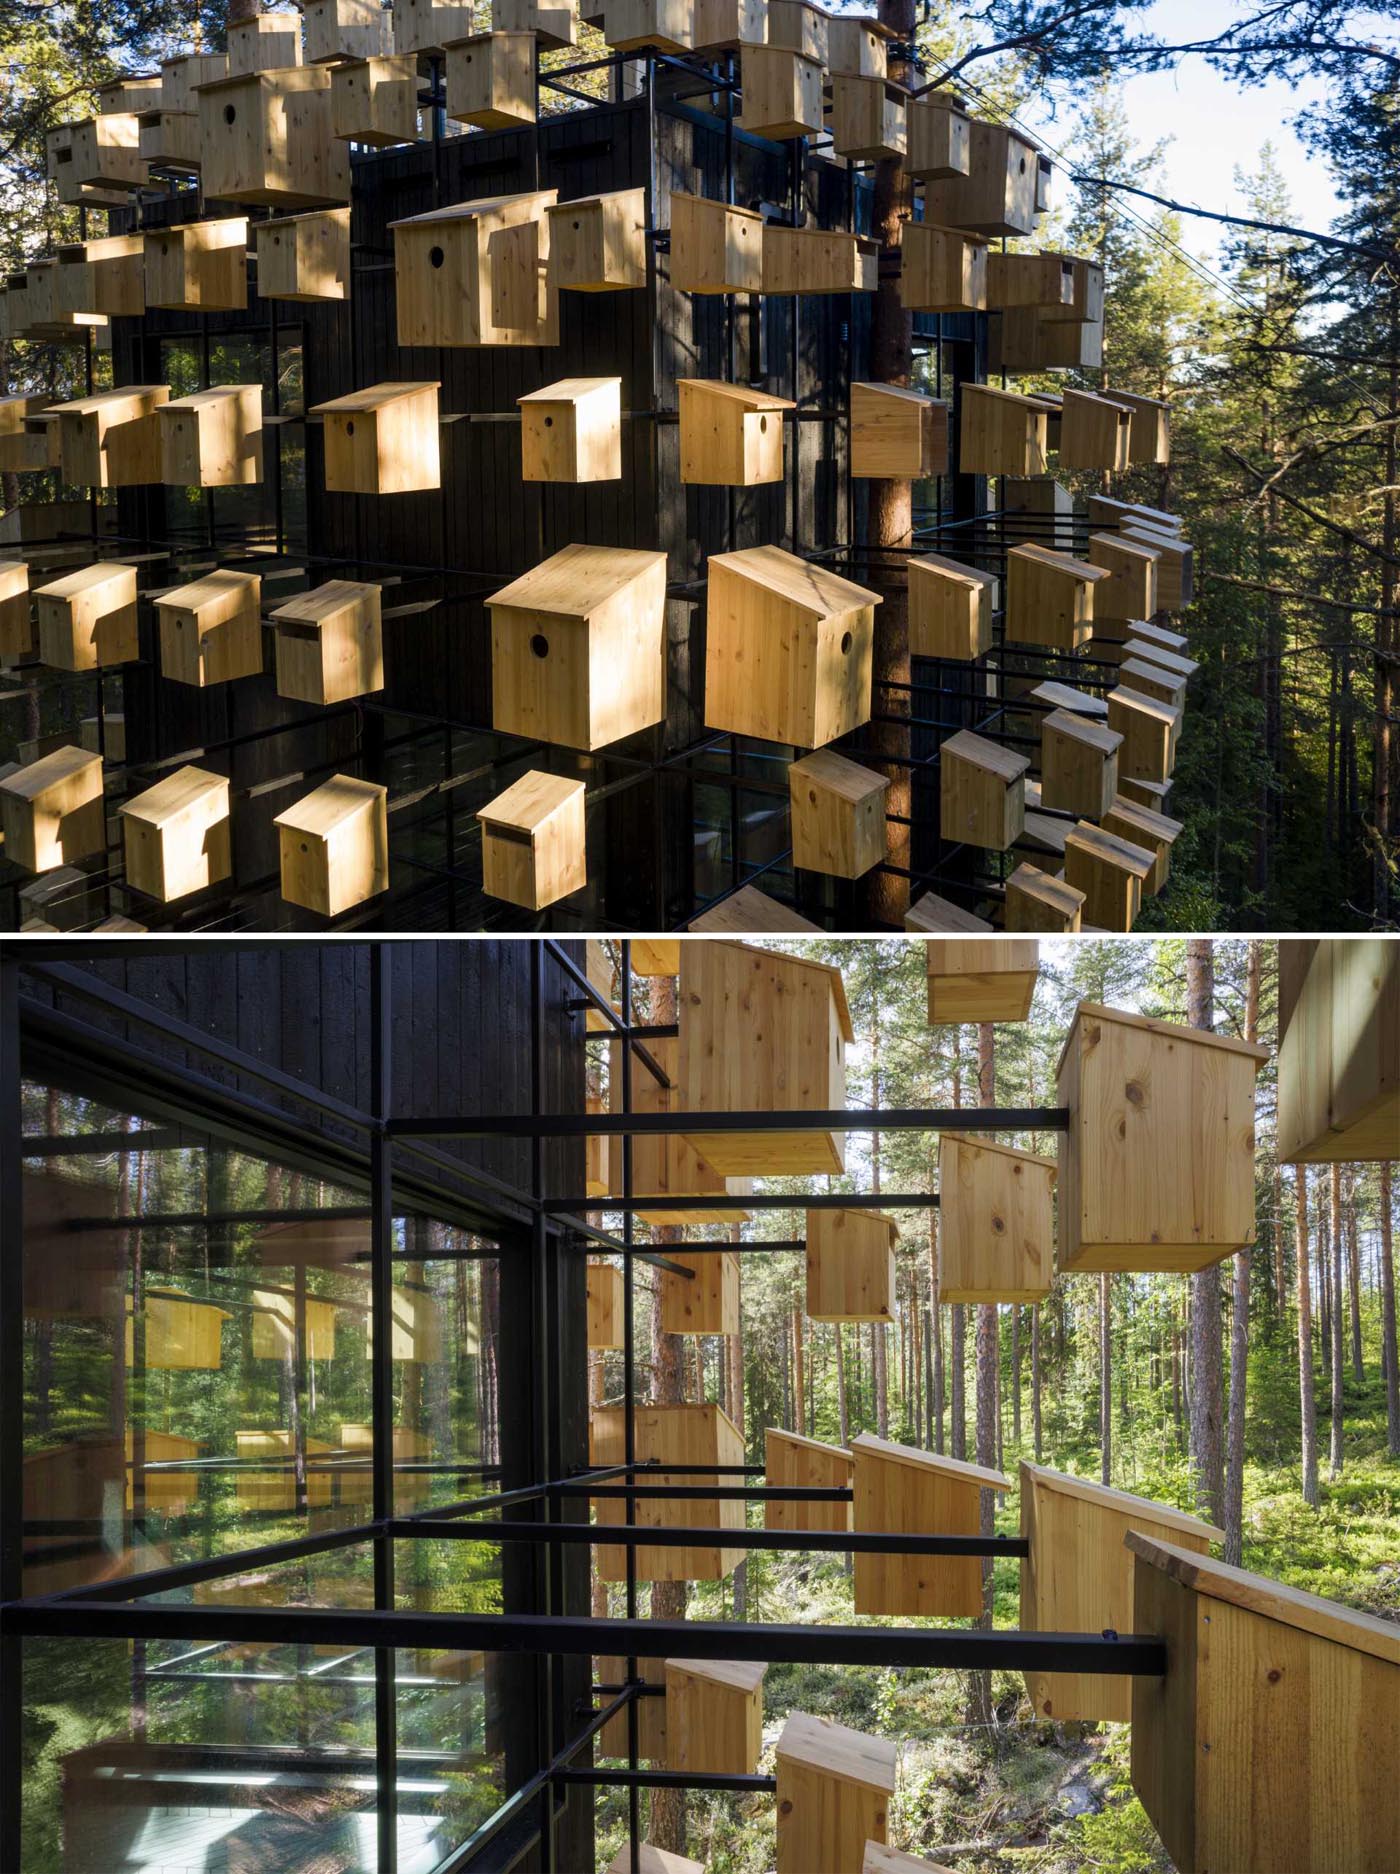 A suspended hotel room in Sweden is covered in 350 bird houses.